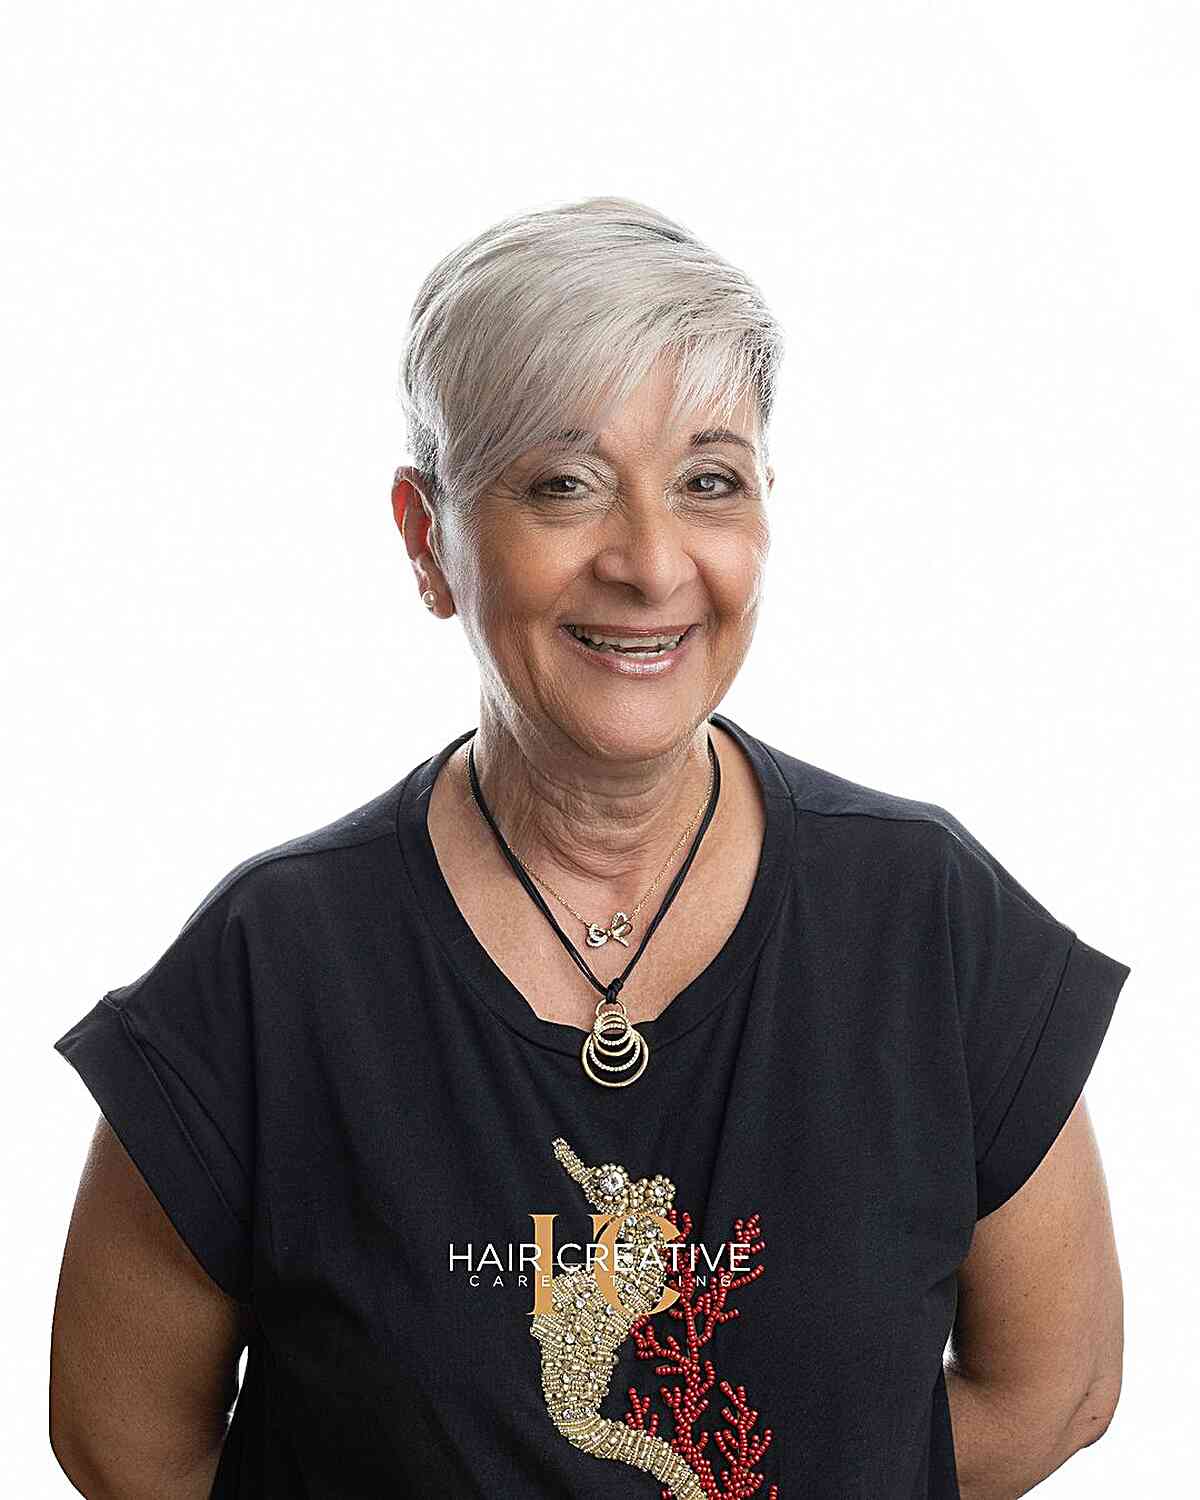 Chic Gray Side-Swept Short Hair for 60-Year-Old Ladies